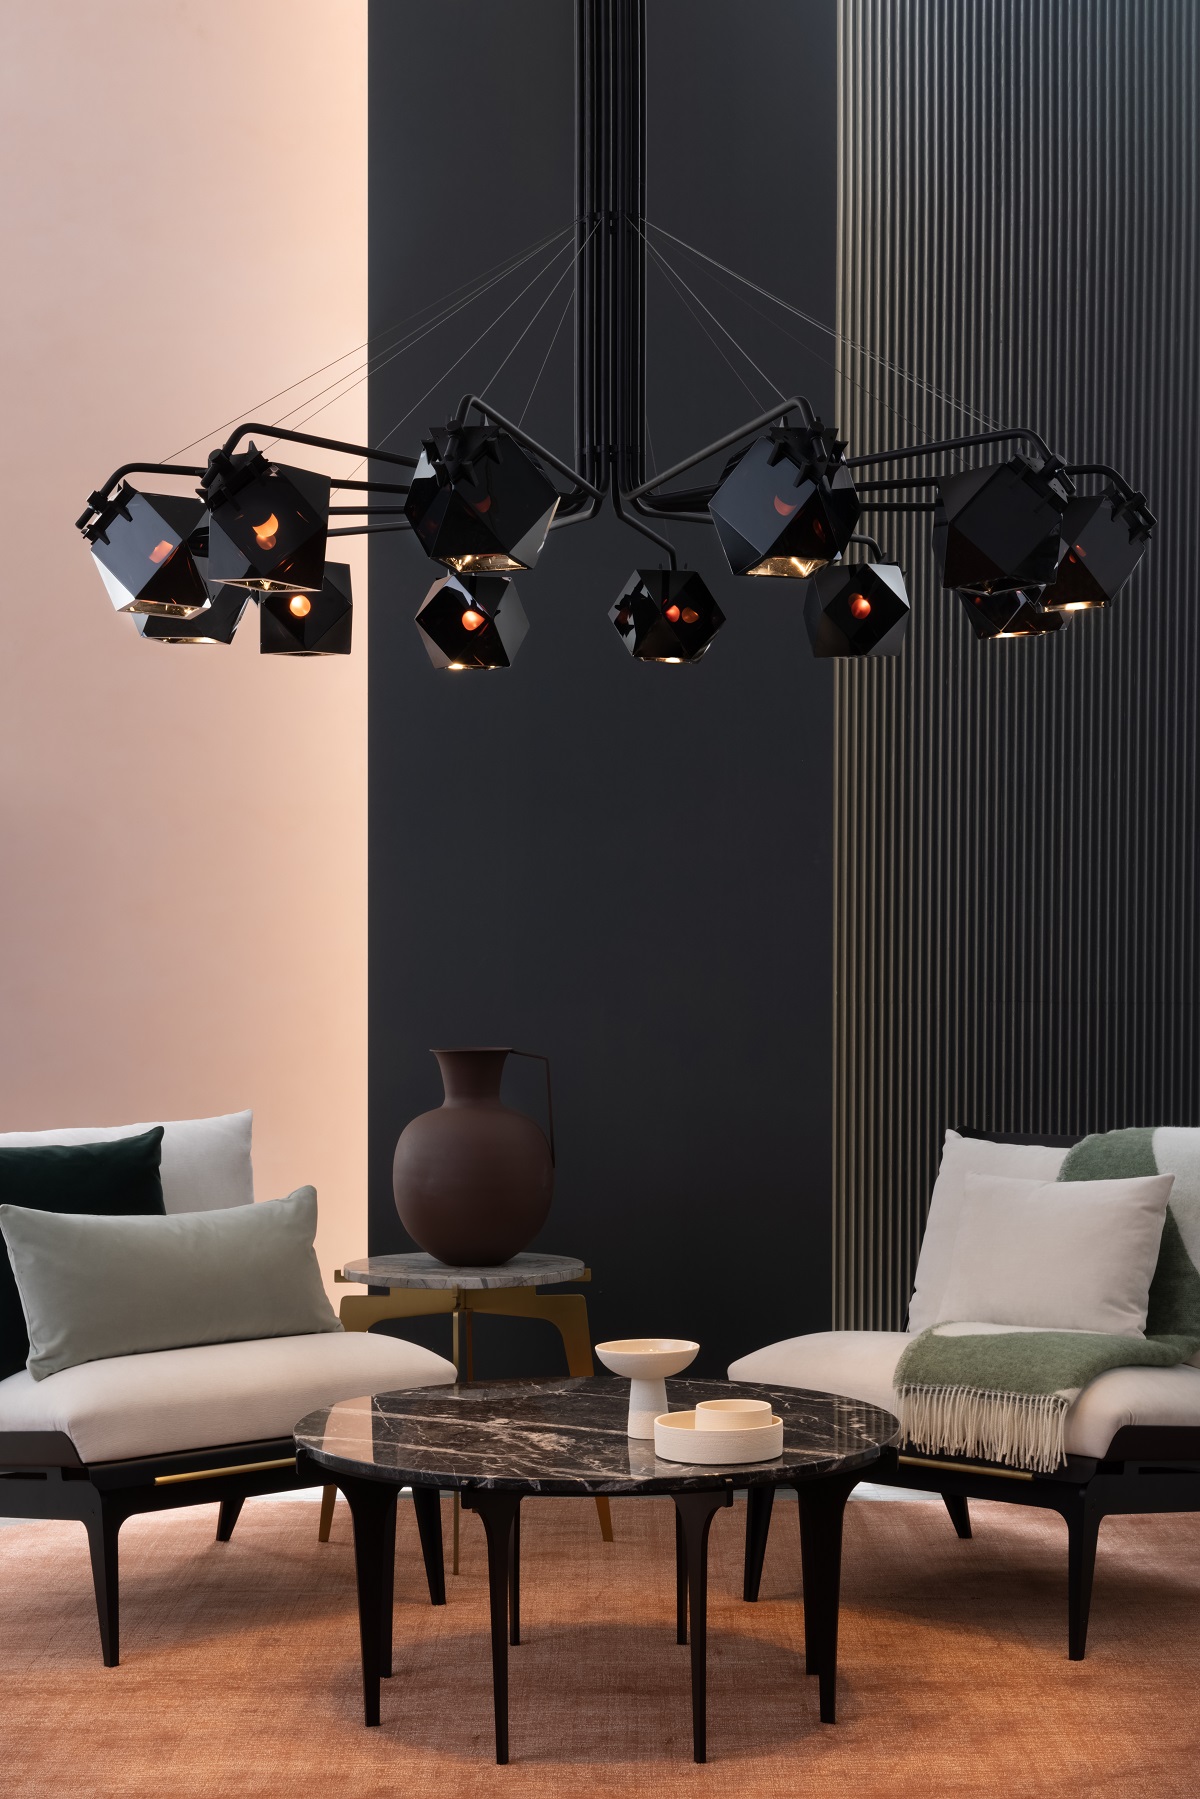 chandelier in black over table and chairs designed by Alessandro Munge for Gabriel Scott